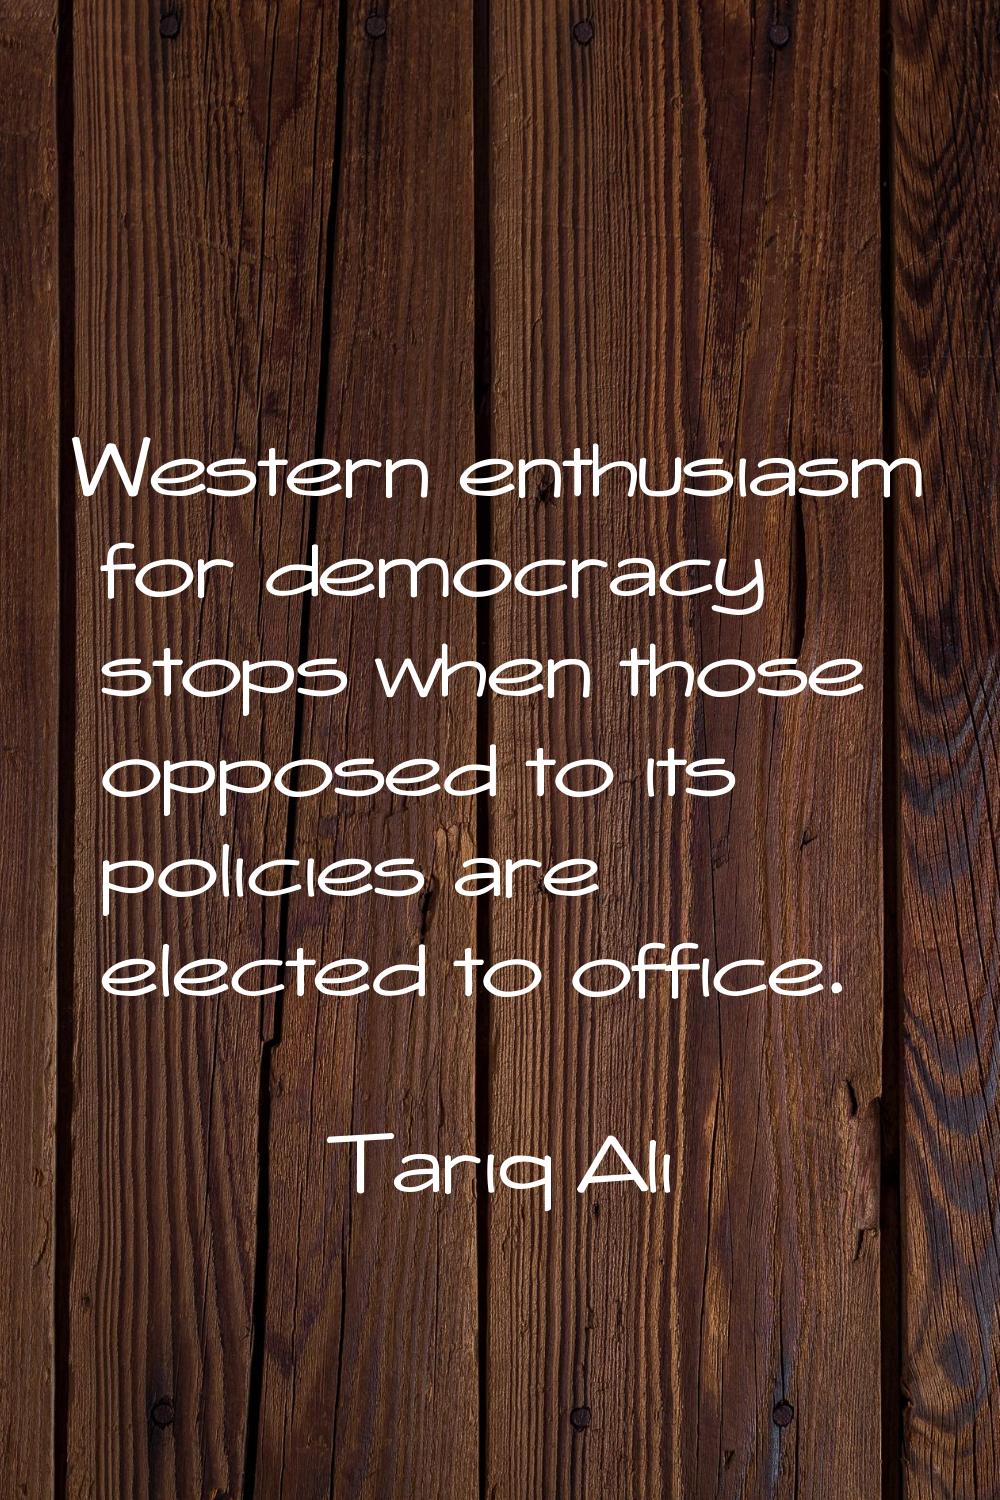 Western enthusiasm for democracy stops when those opposed to its policies are elected to office.